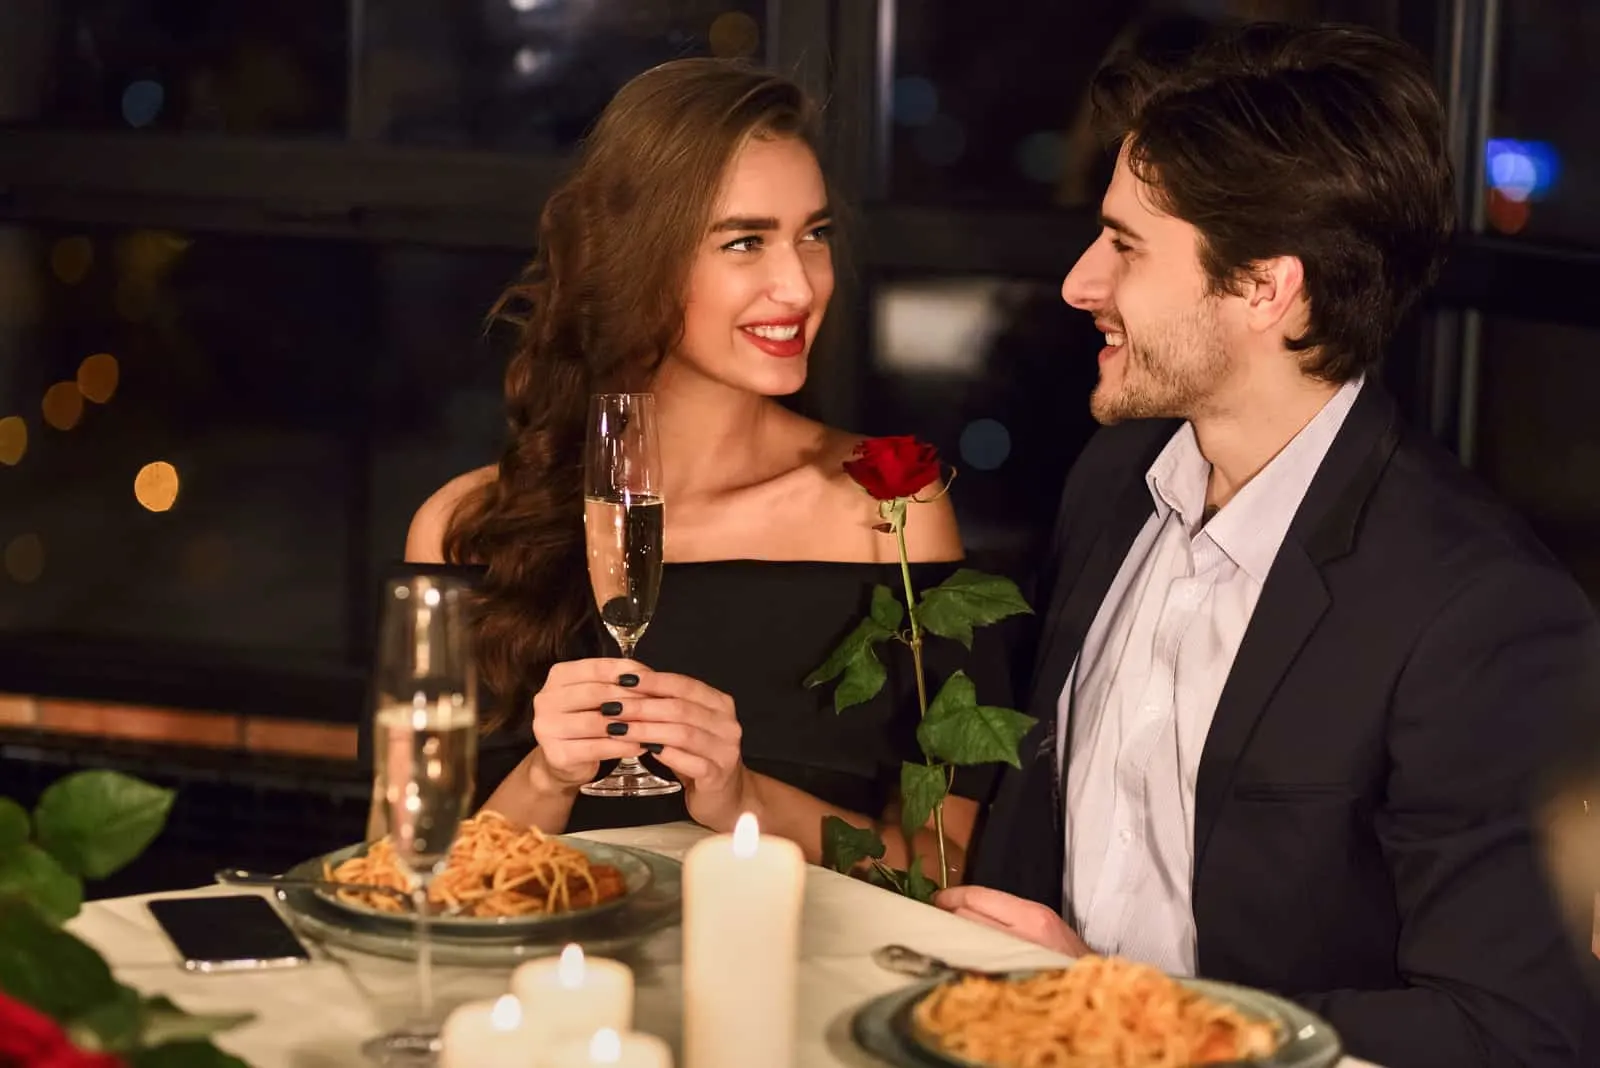 at dinner with wine a man gives a rose to an overjoyed woman